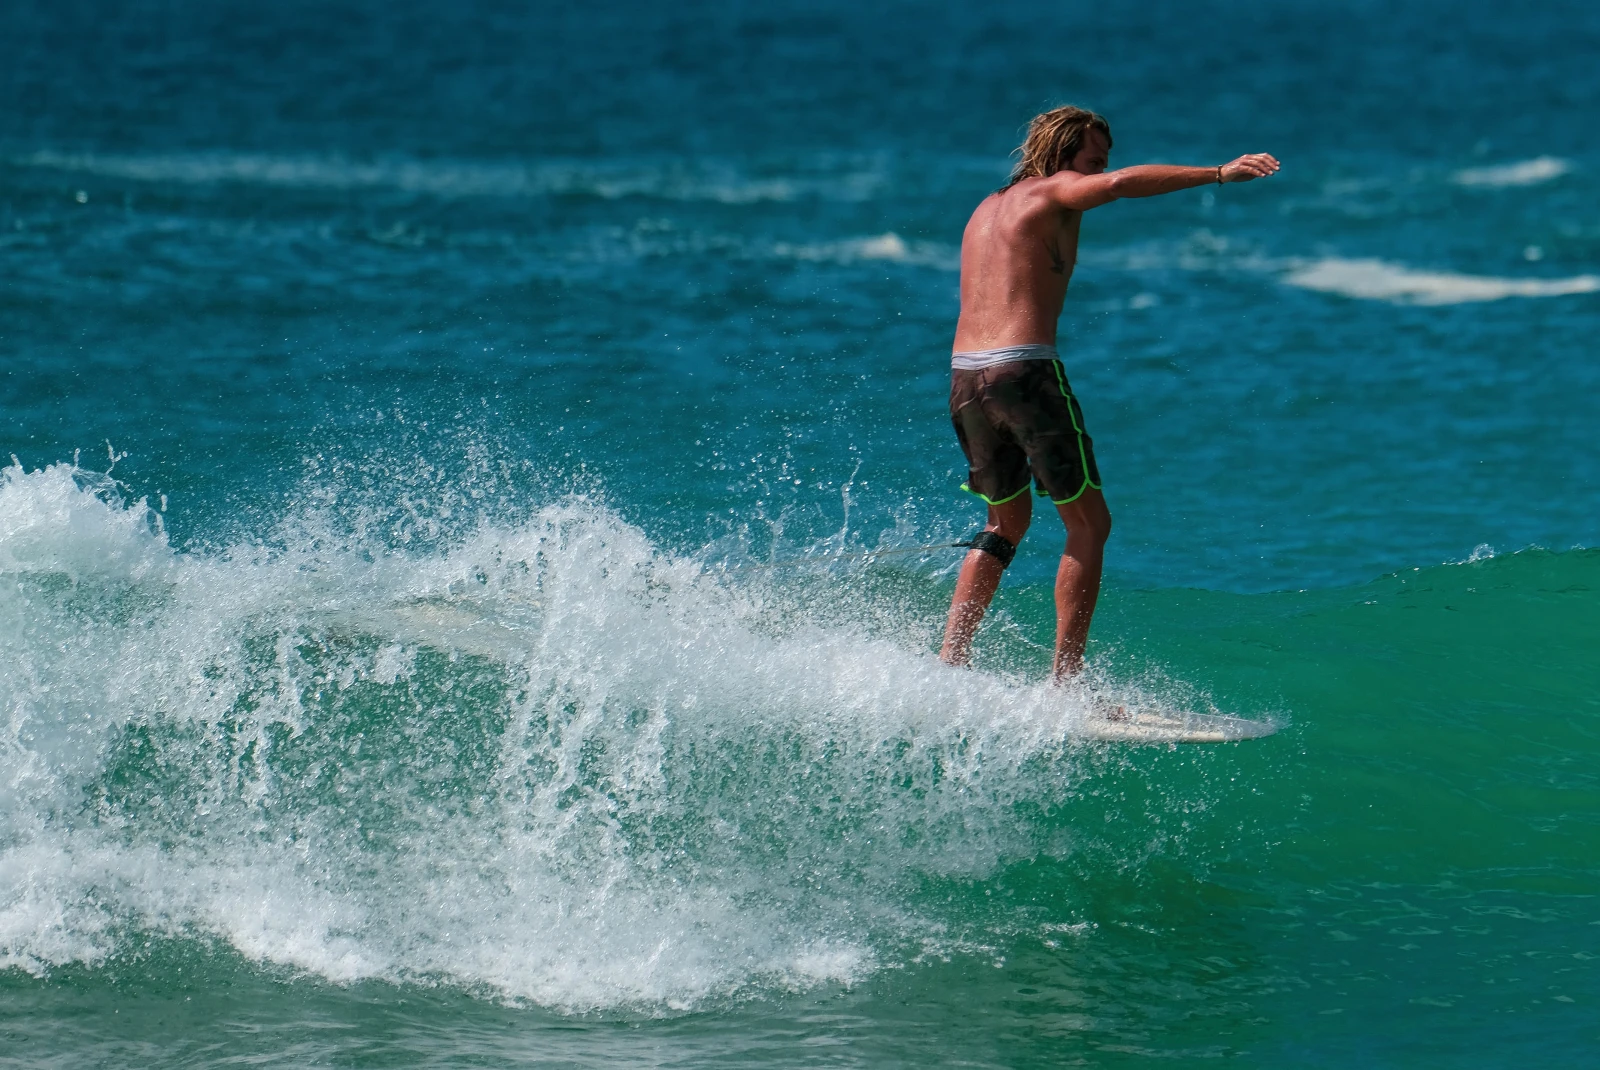 A surfer with brown swim shorts riding a blue and white wave on a white surfboard in Sri Lanka.